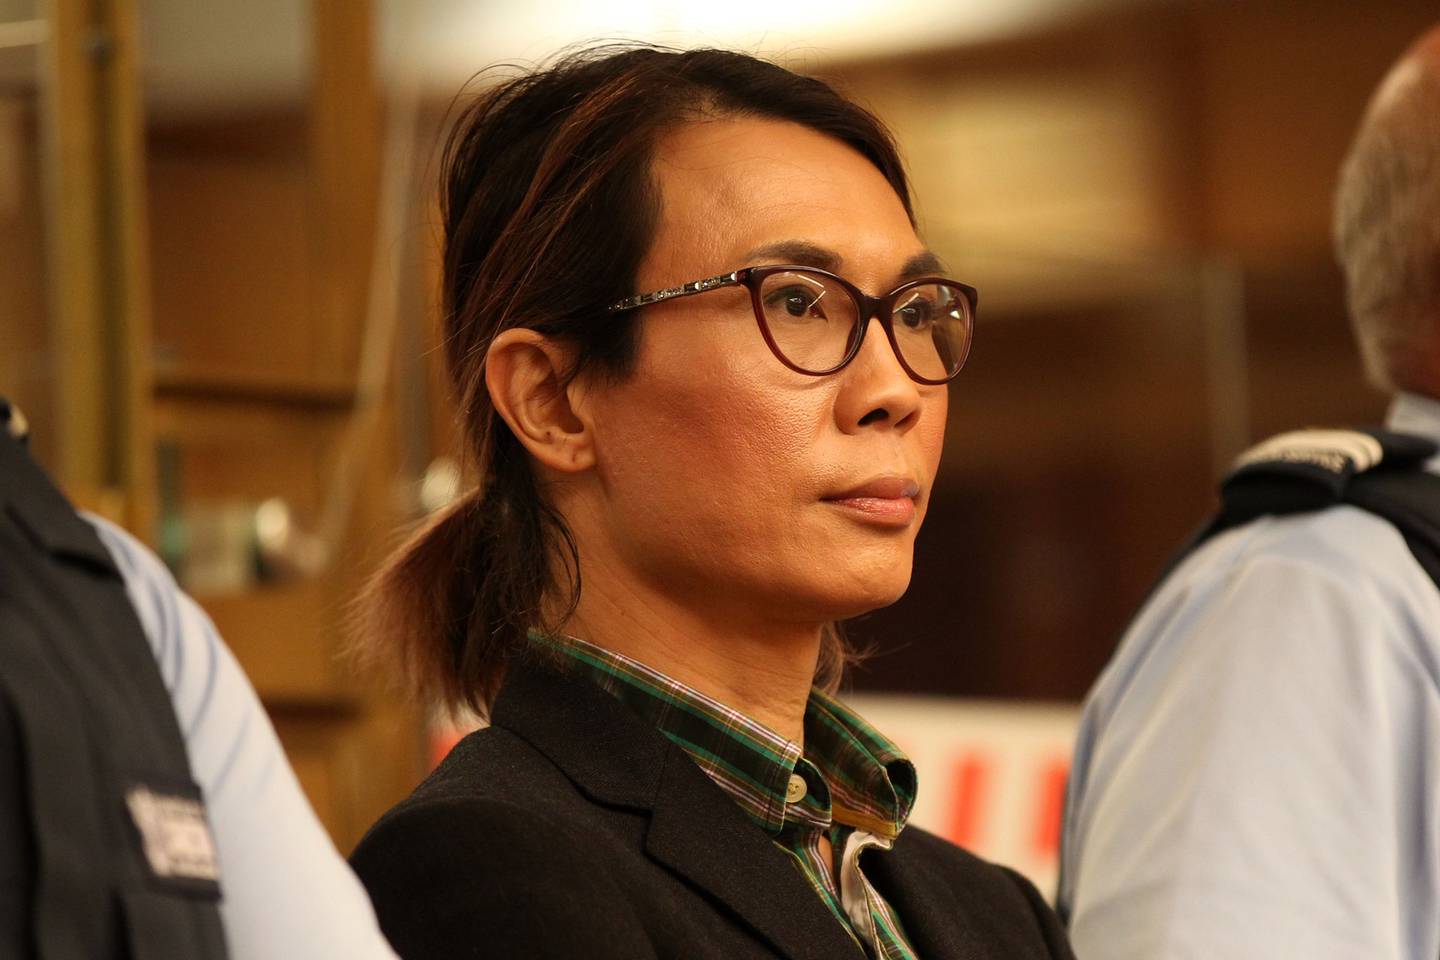 Former doctor David Kang Huat Lim was convicted of sexually assaulting four male patients. Image credit: New Zealand Herald